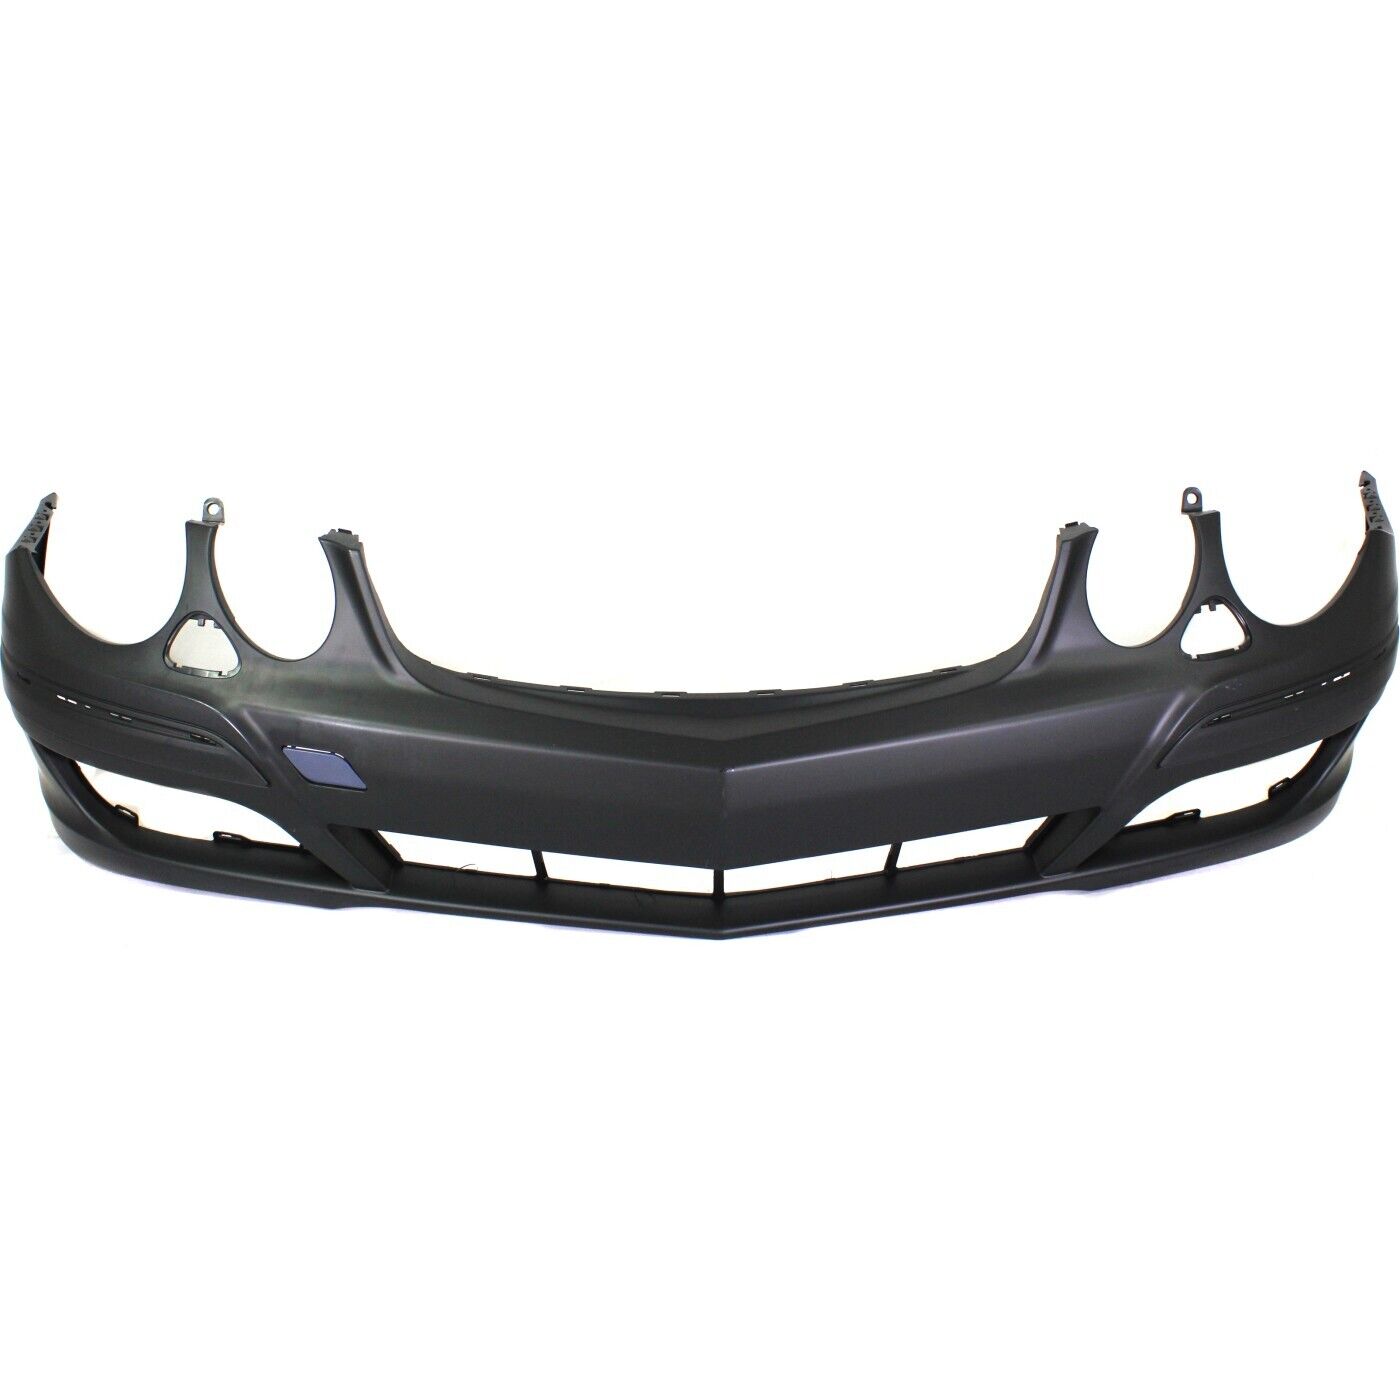 Bumper Cover For 2007-2009 Mercedes Benz E350 with Headlight Washer Holes Front